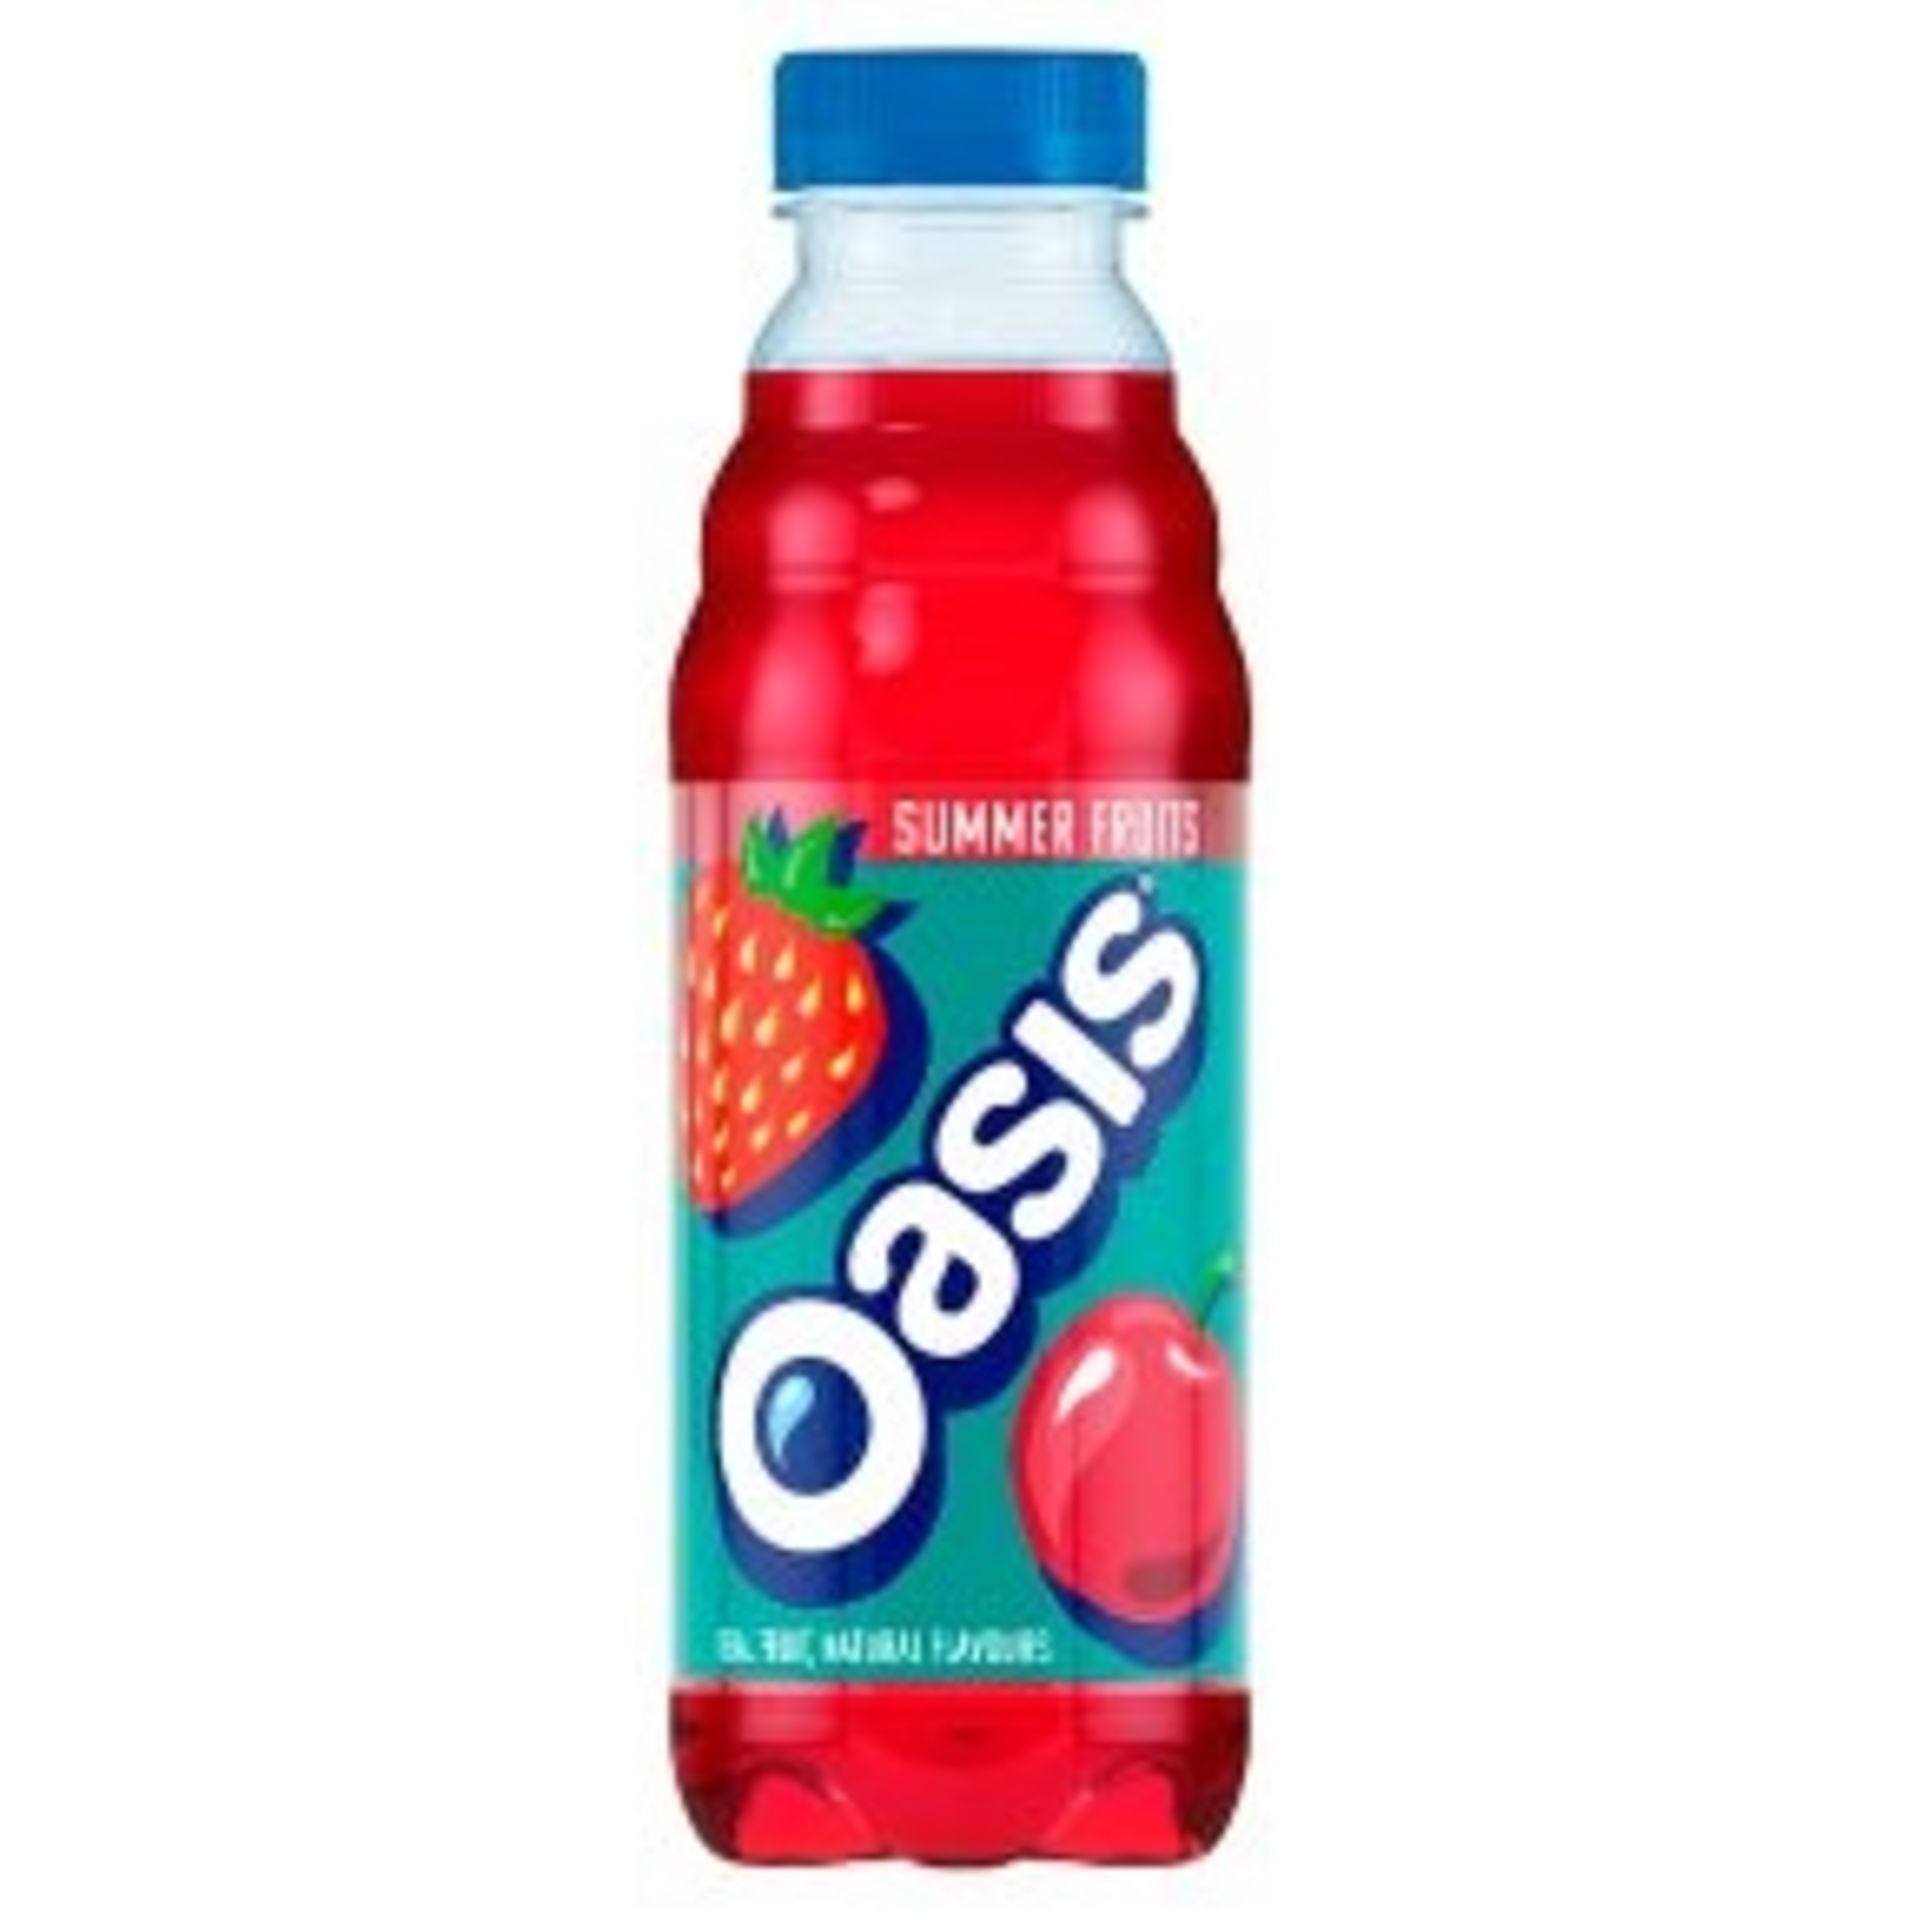 1 LOT TO CONTAIN 12 X 500ML BOTTLES OF OASIS SUMMER FRUITS / BEST BEFORE 31ST MAY 2019 / PN - 55 (